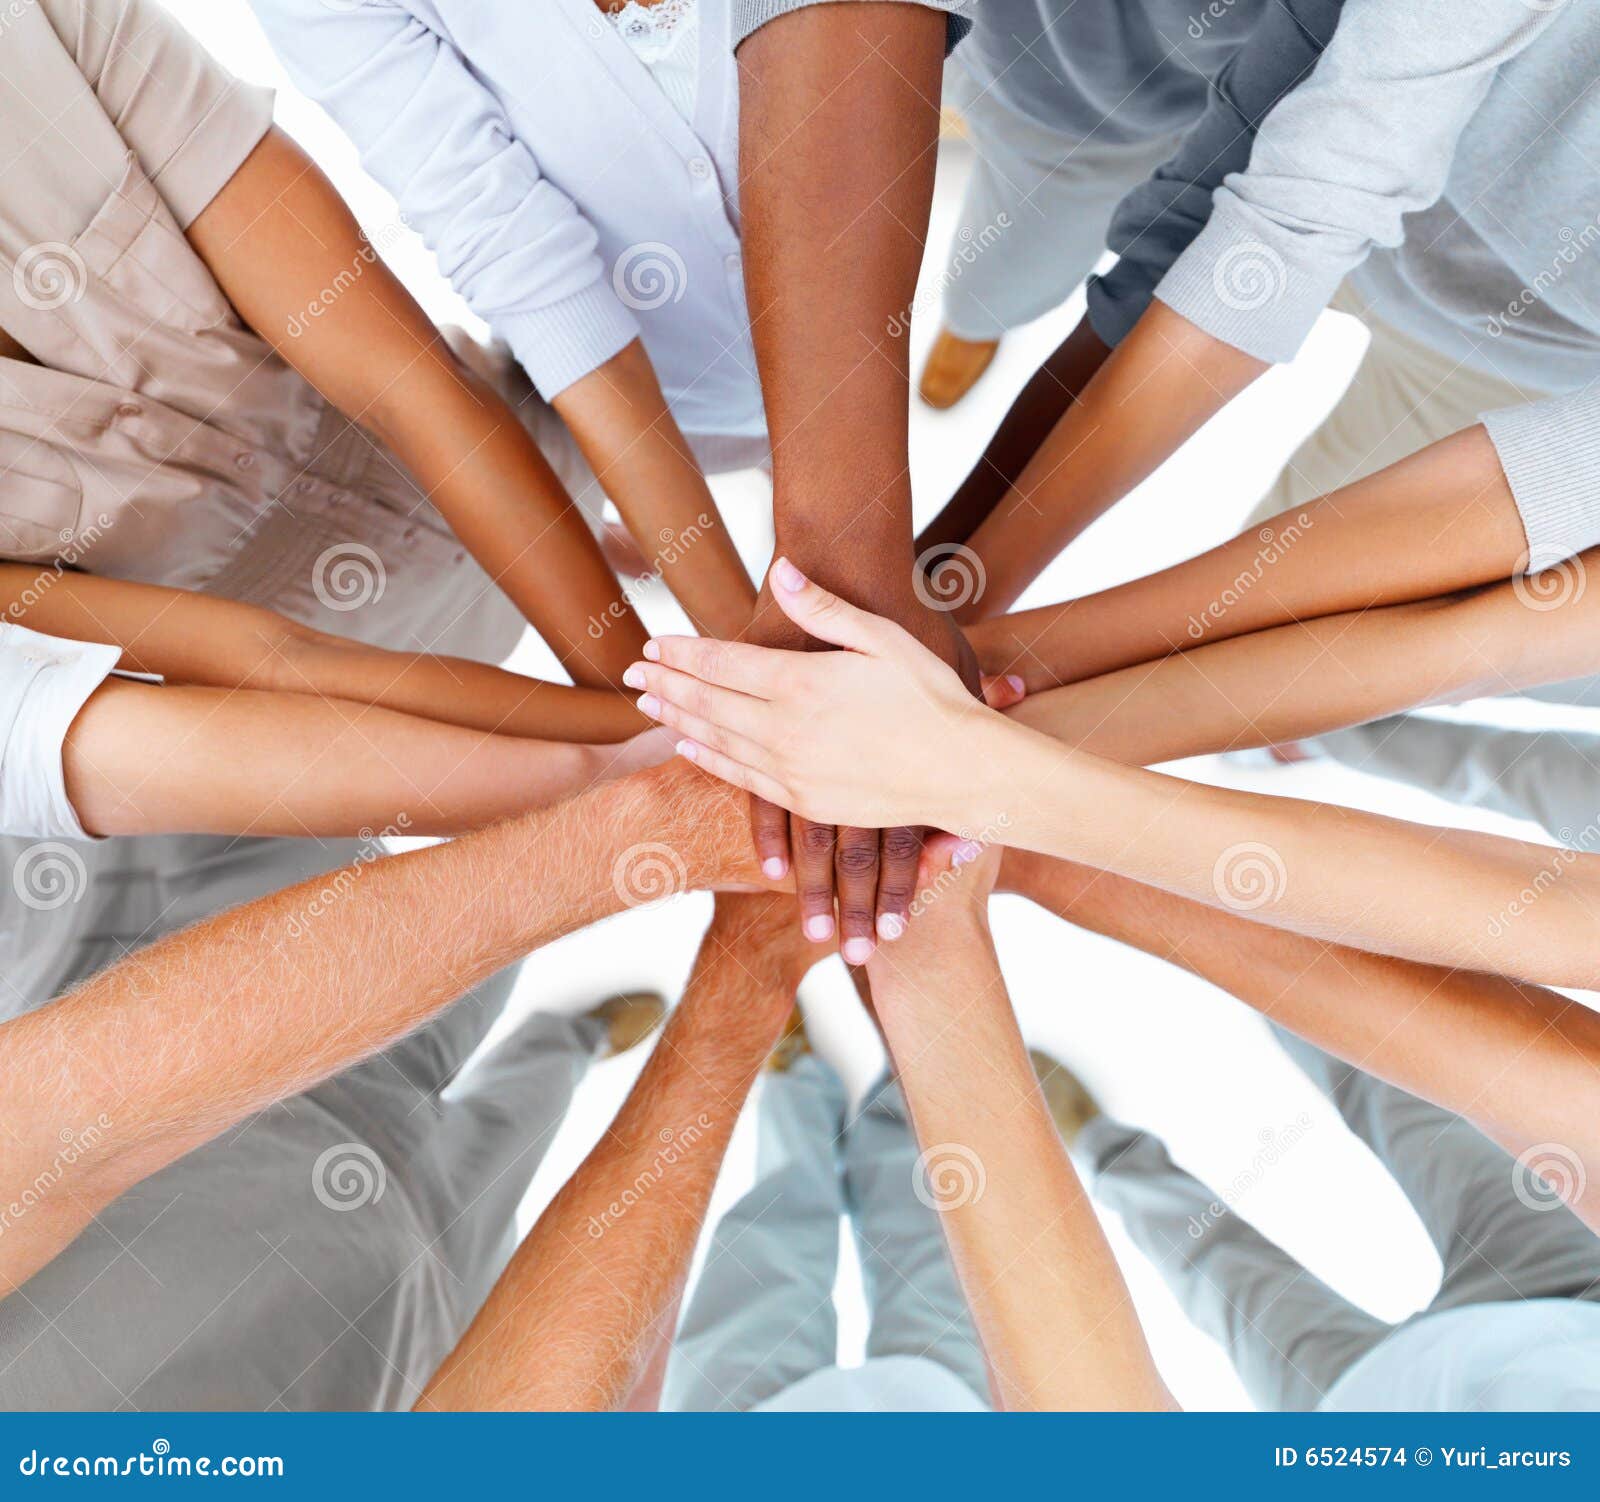 business people-hands overlapping to show teamwork